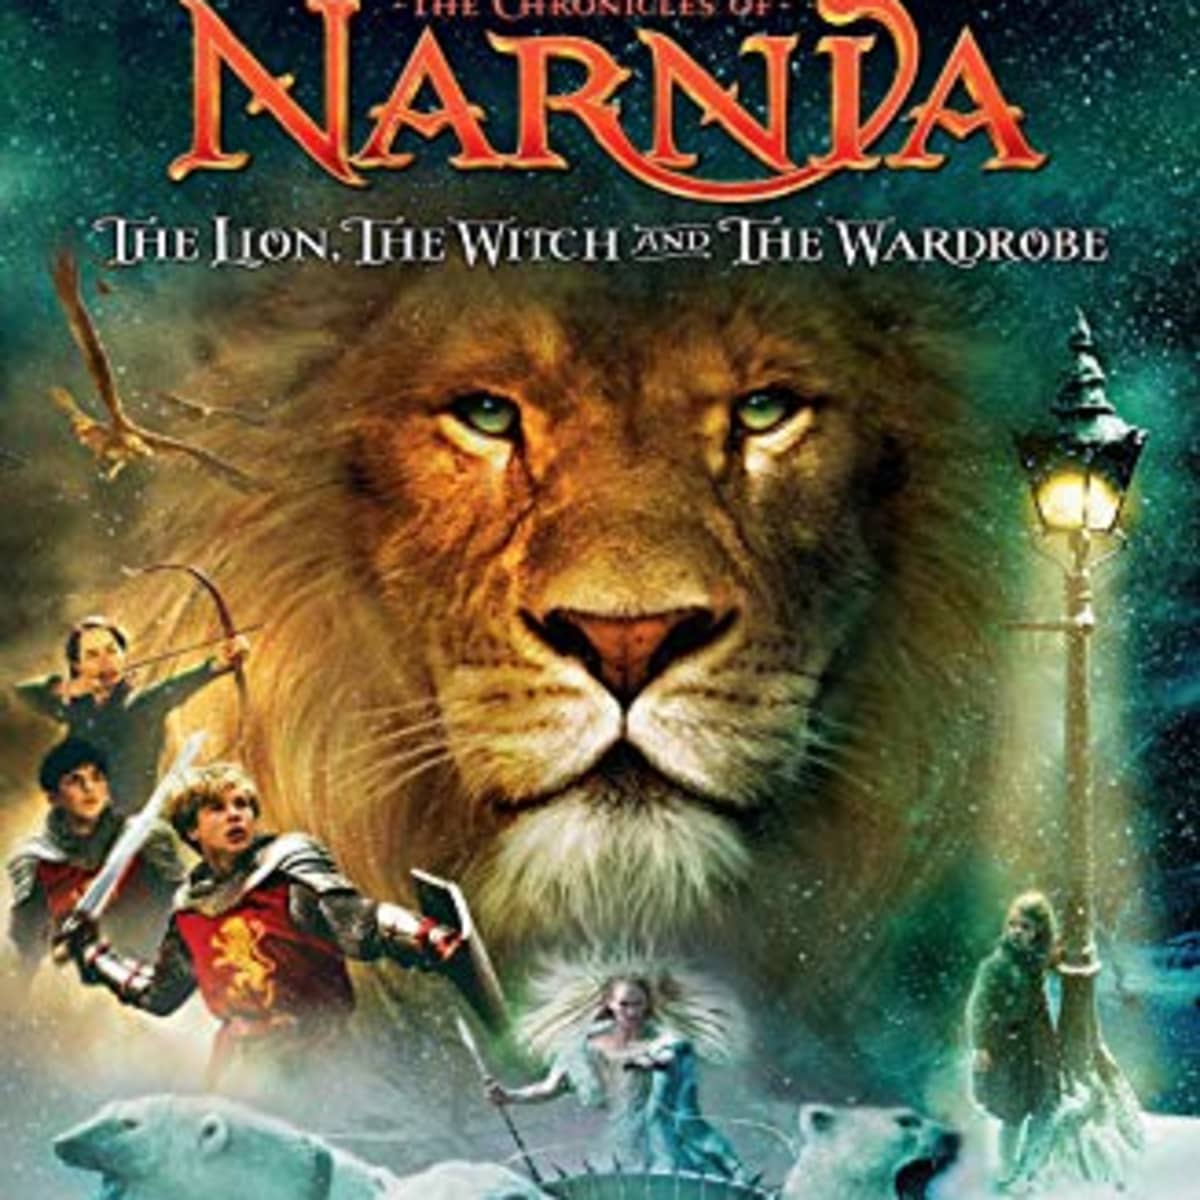 Narnia is evil. Because scripture.